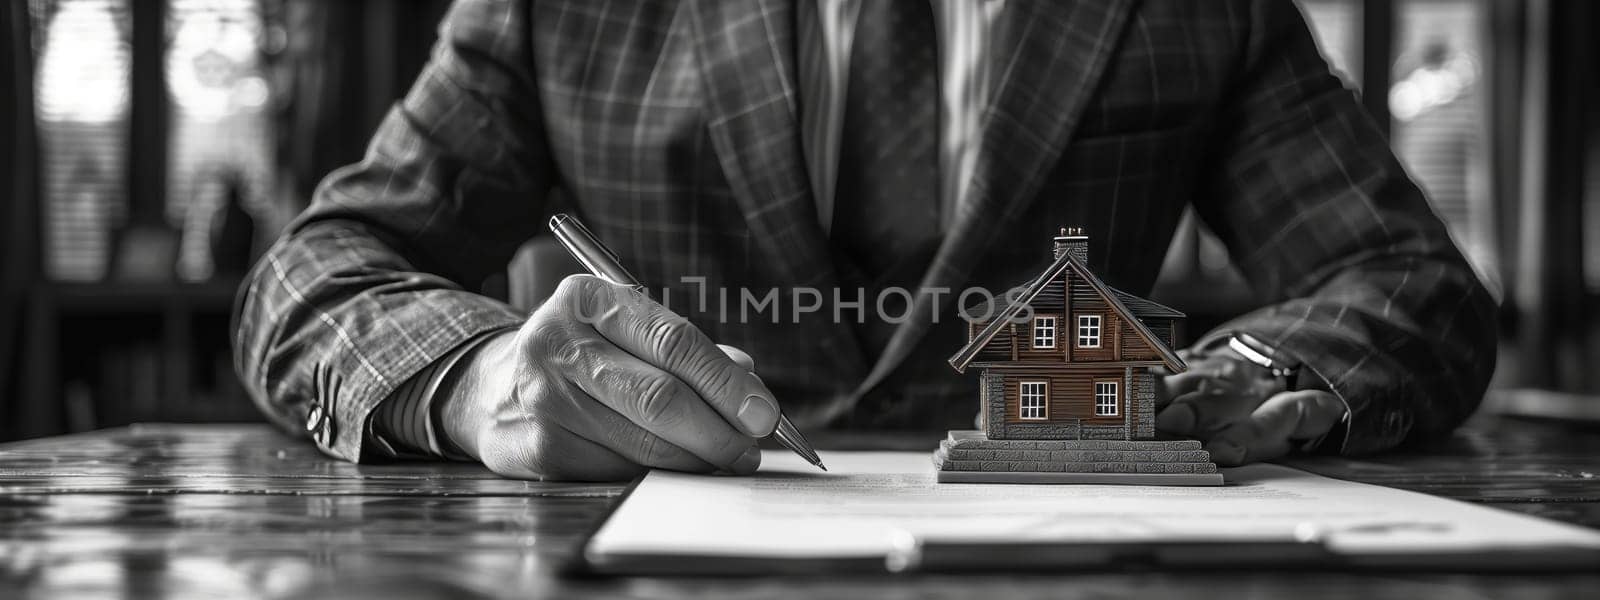 A stylish man in a blackandwhite suit and tie is seated at a wooden table, elegantly signing a document. The monochrome scene captures a classic and sophisticated aesthetic